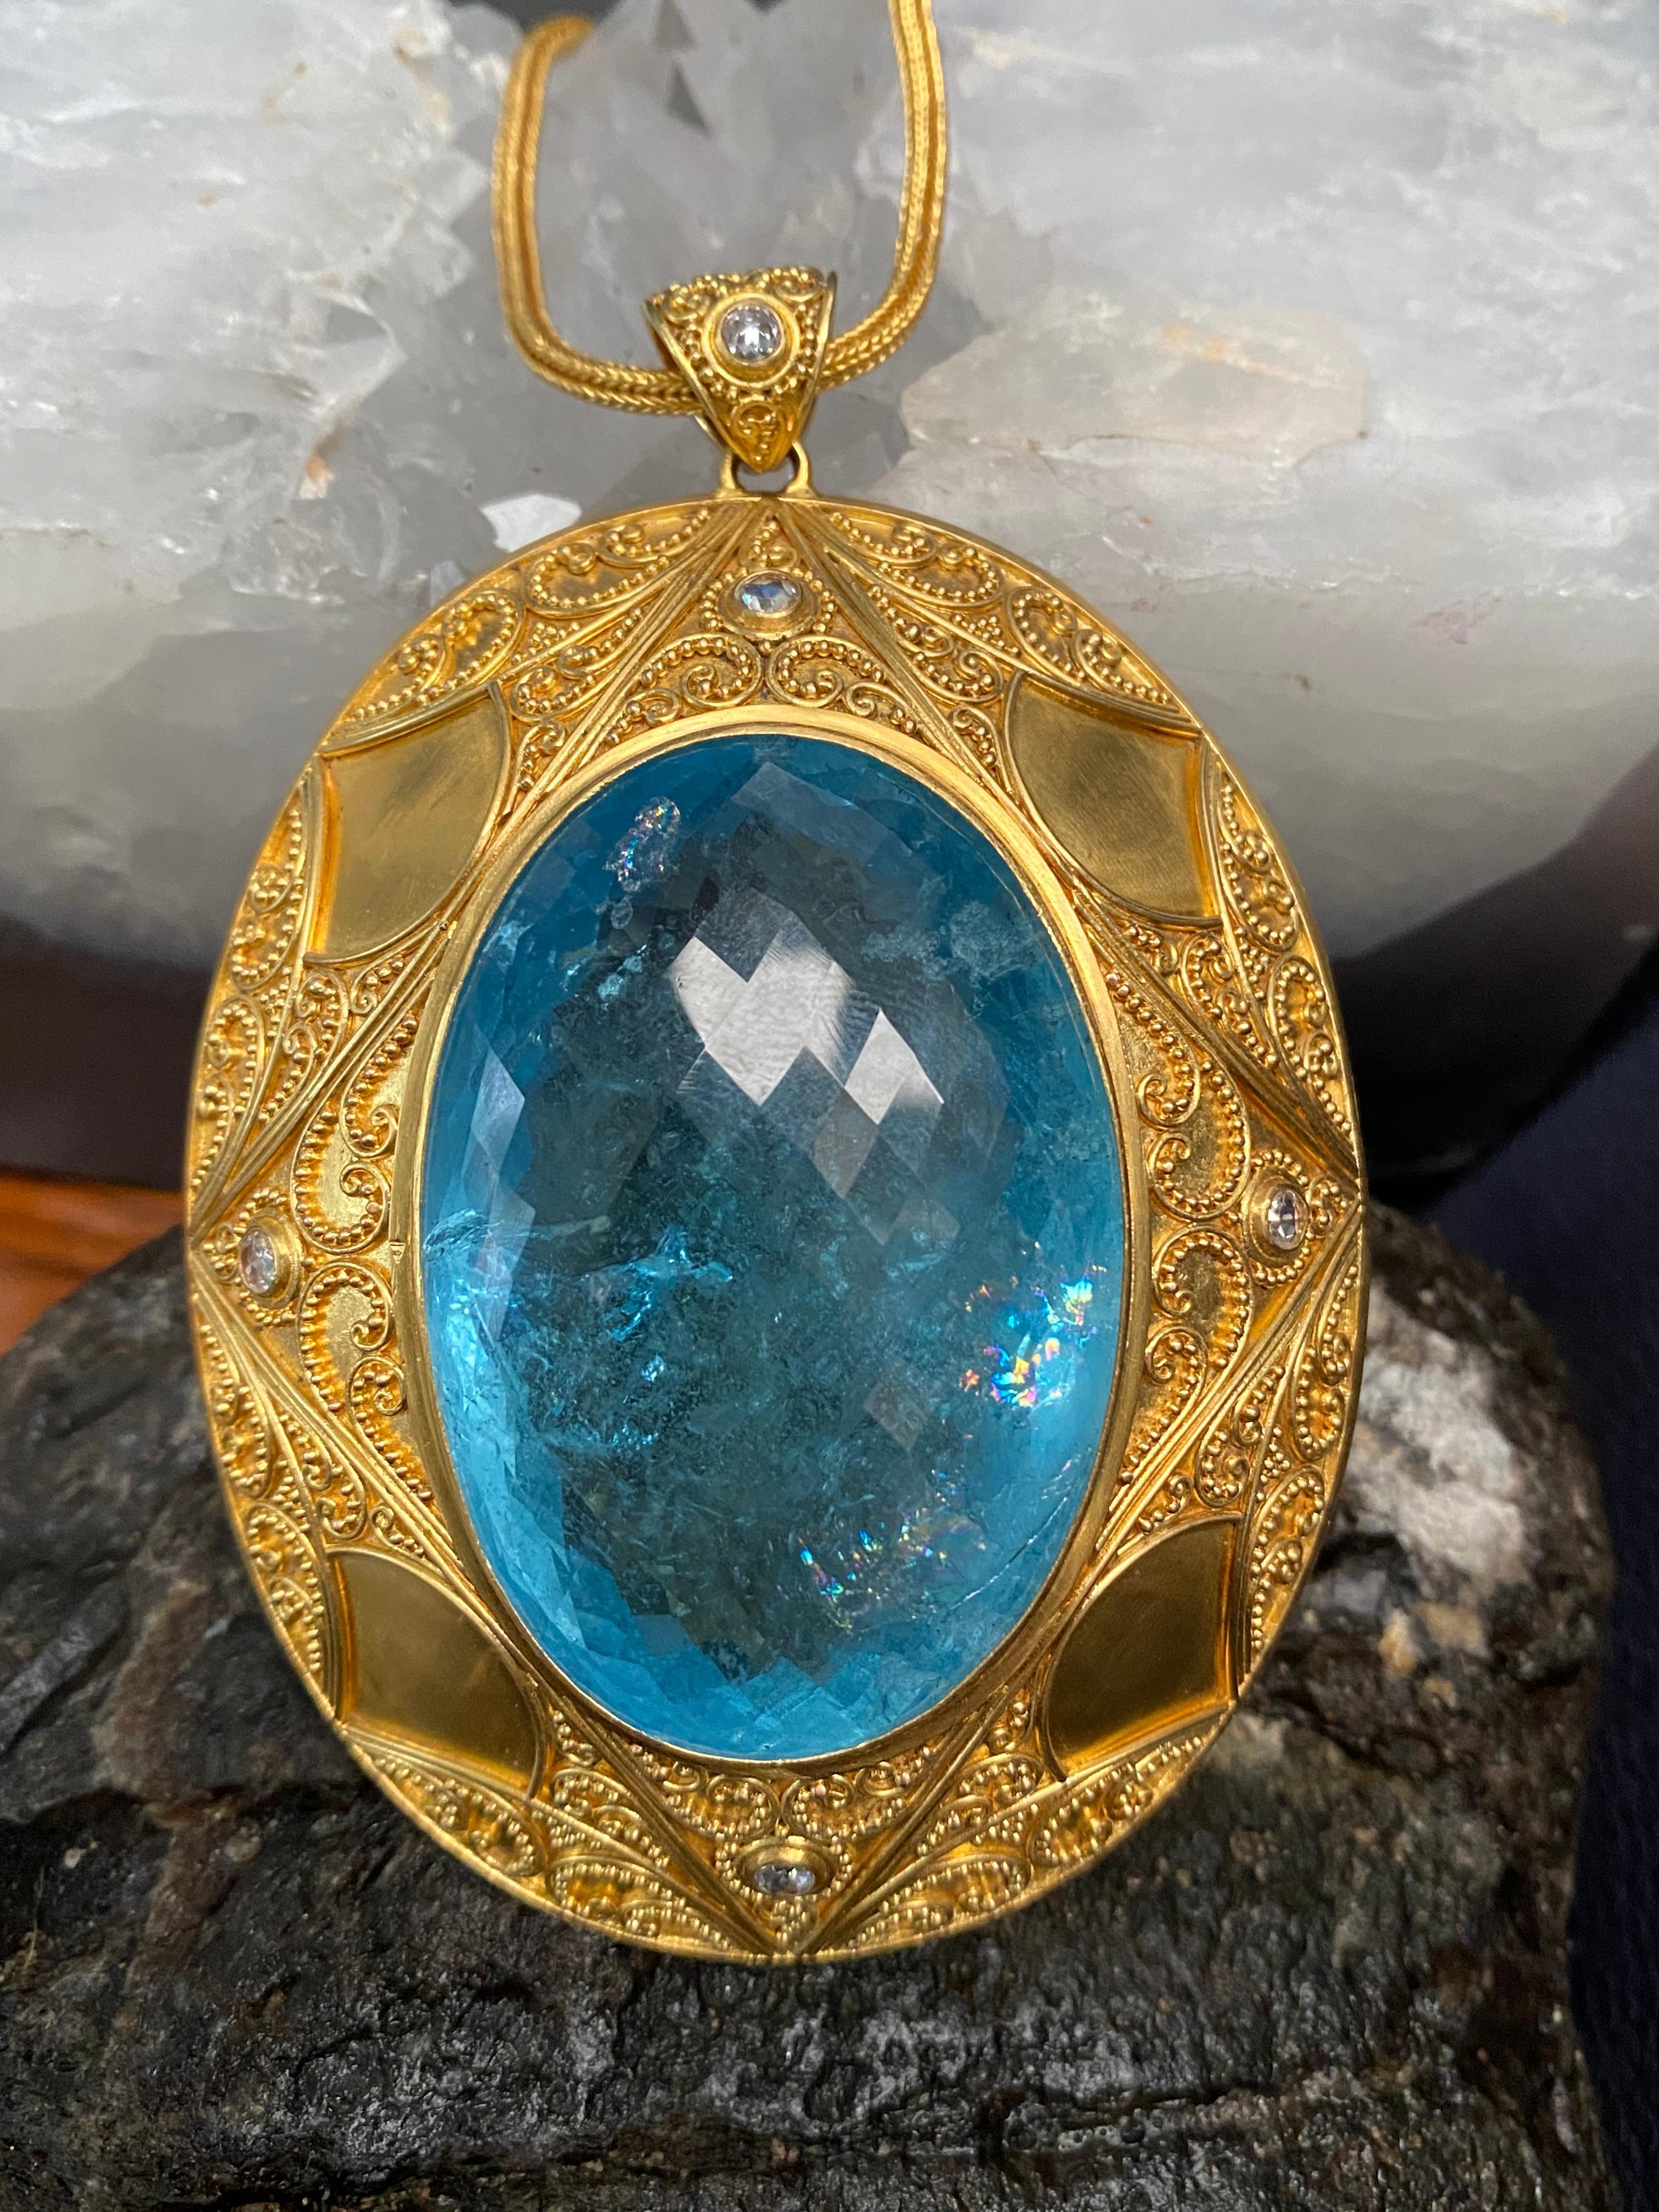 A massive 30 x 50 mm oval Brazilian Minas Gerais faceted aquamarine is the centerpiece of this truly one-of-a-kind masterpiece. 182.3 carats altogether. This amazing stone is set within a wide, intricately designed high-karat granulated setting with